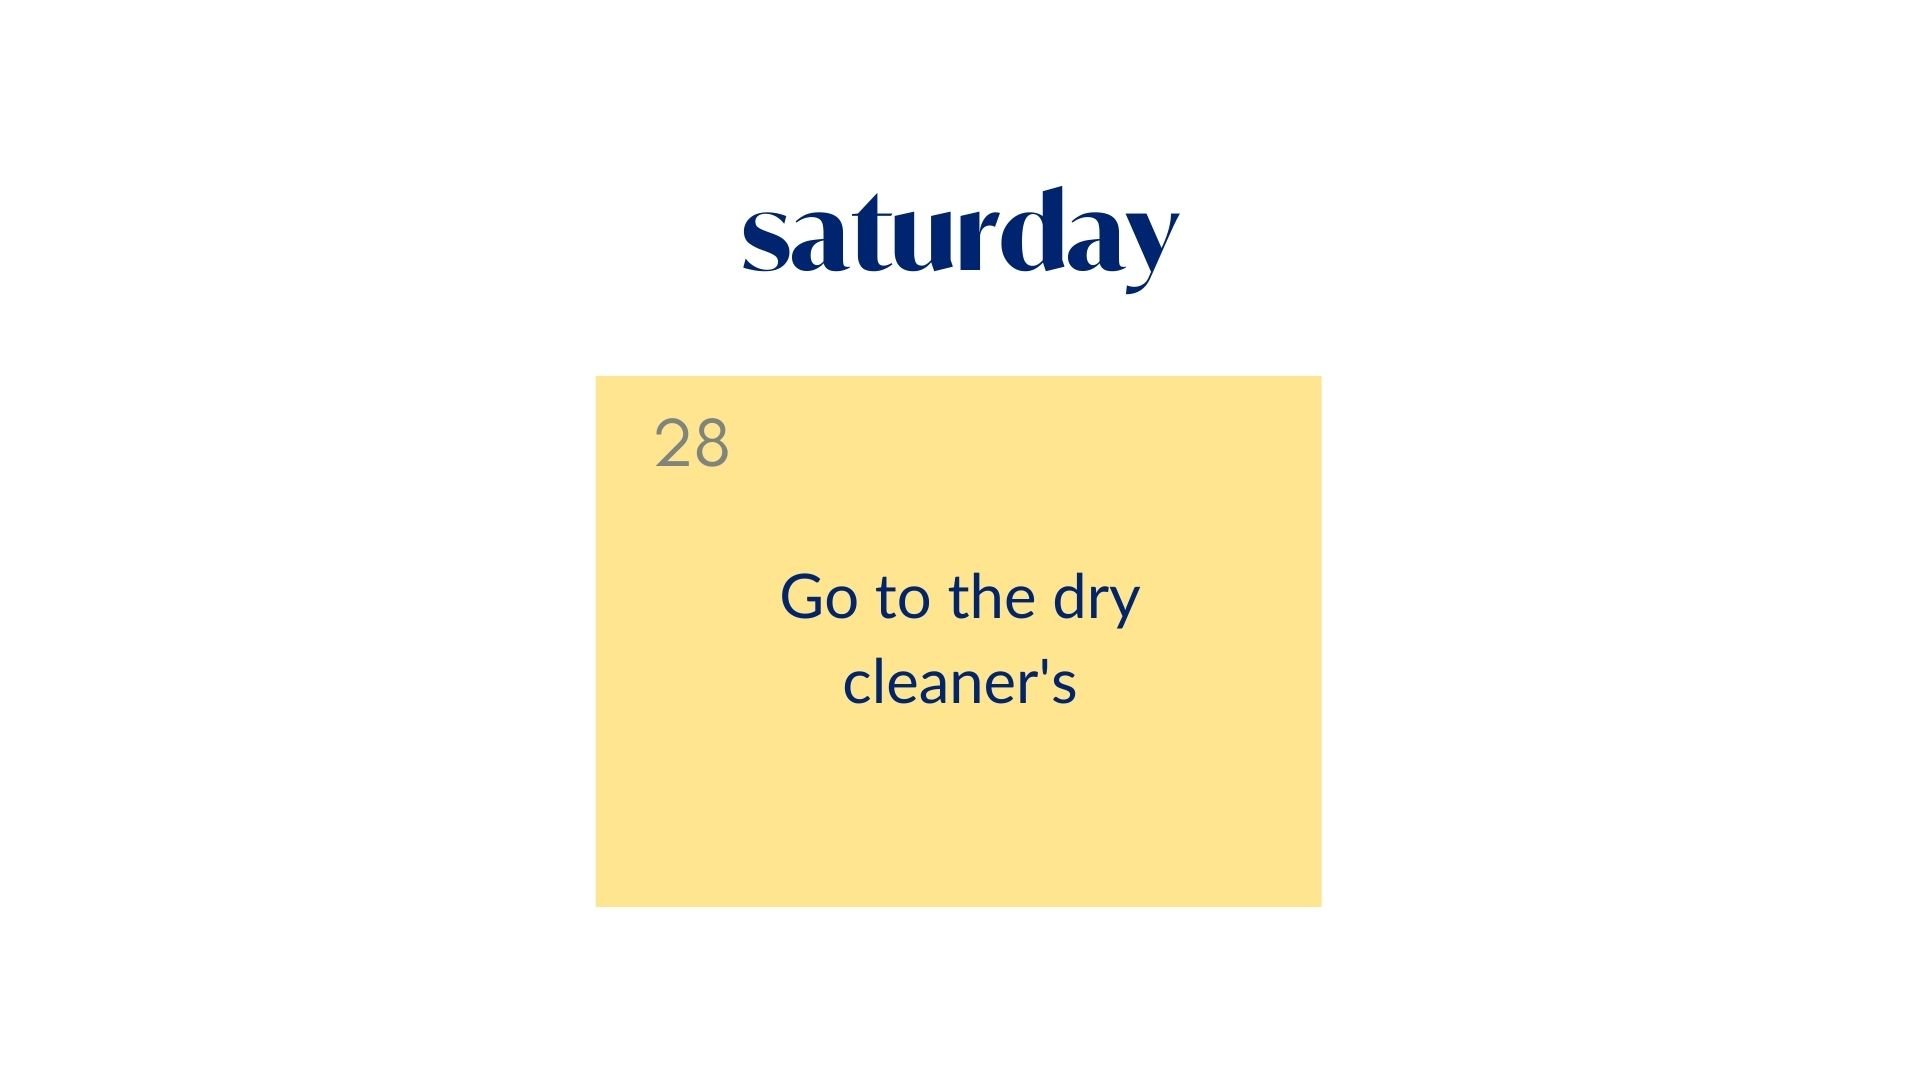 Day 28: Go to the dry cleaner's